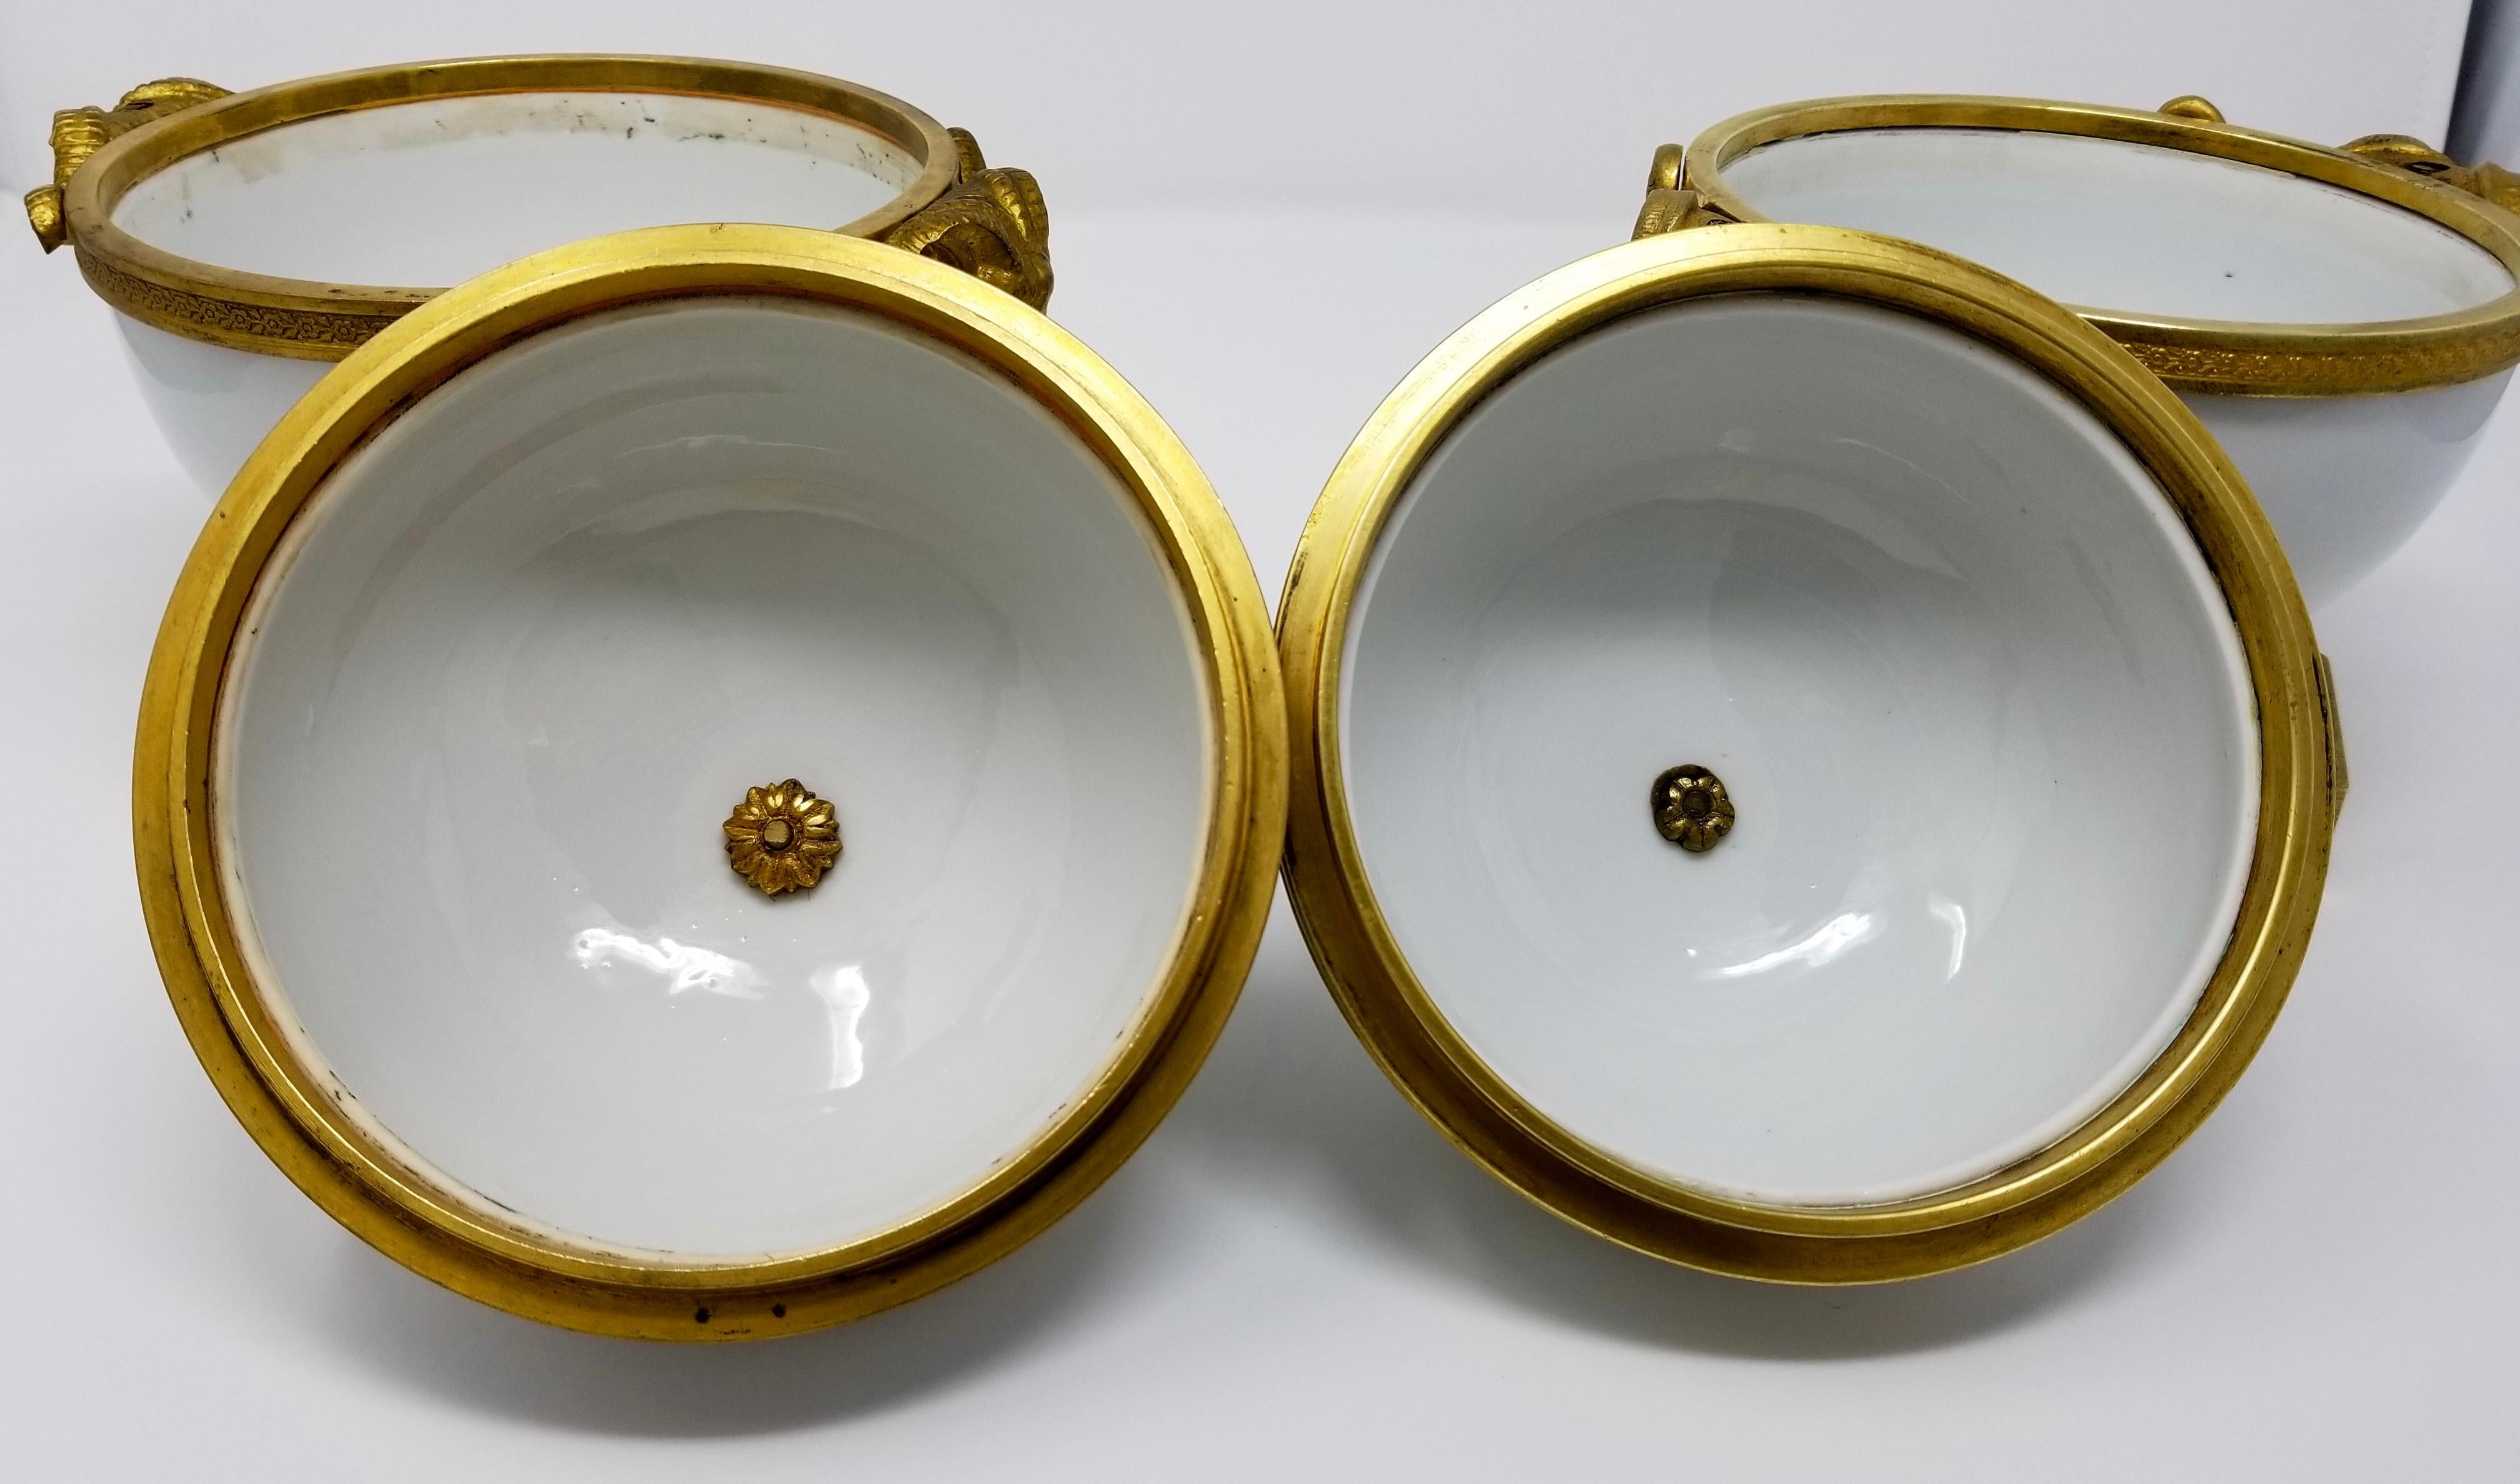 Pair of Louis XVI Ormolu Mounted White Porcelain and Dore Bronze Covered Bowls For Sale 3